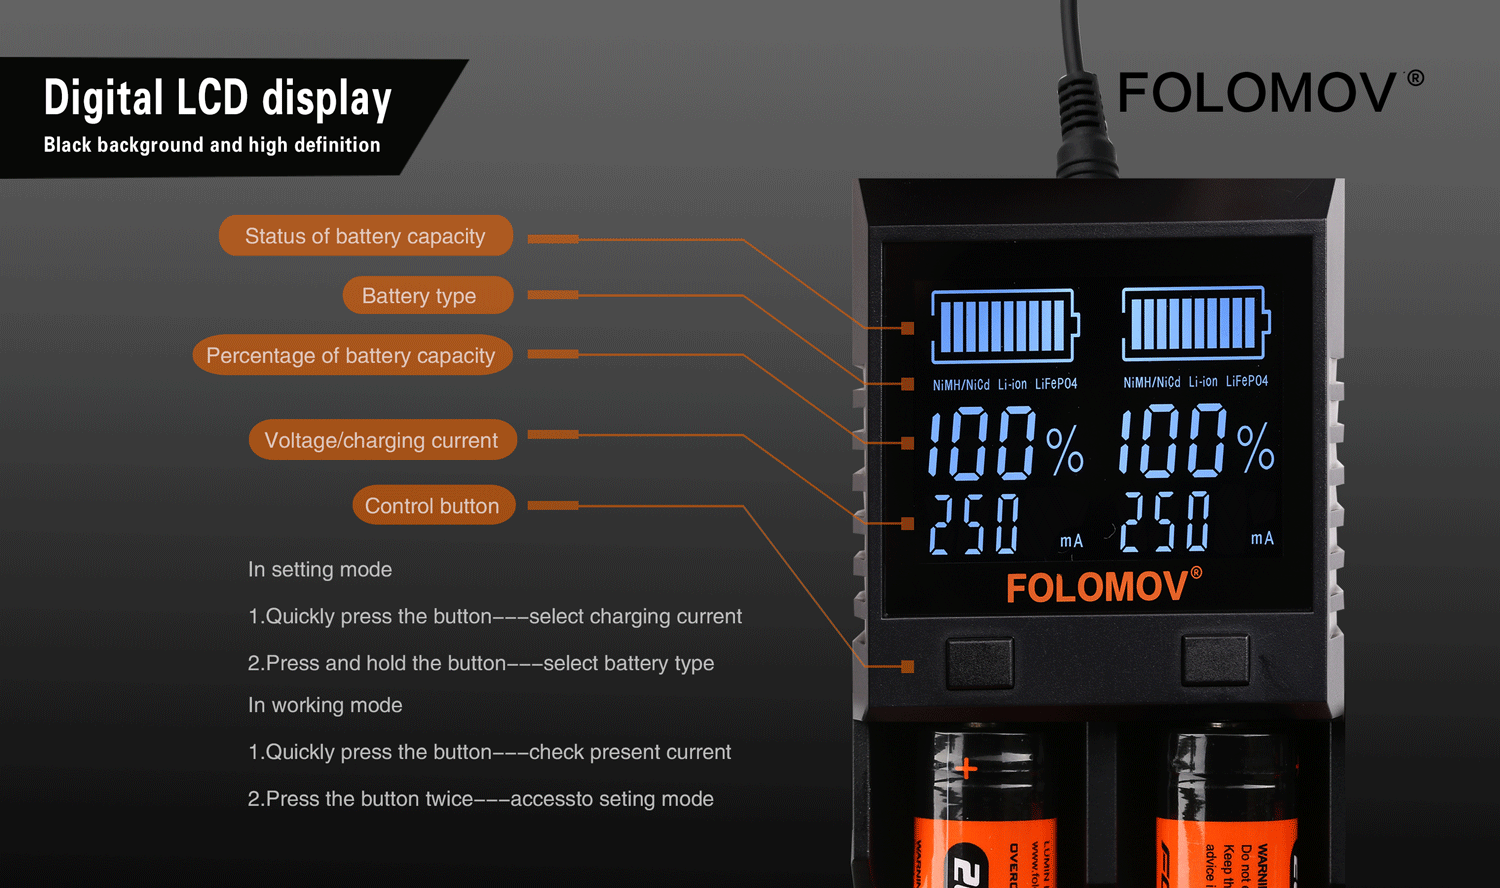 Folomov A2 Smart Quick Charger with LCD Screen Digital LCD display FOLOMOV Black background and high definition Status of battery capacity Battery type Percentage of battery capacity NiMH NiCd Li ion LiFeP04 iMH NiCd Li ion LiFeP04 Voltage charging currer 101  I  Control button mA In setting mod FOLOMOV  1 Quickly press the button   select charging current 2  Press and hold the button select battery type In working mode Quickly press the button    check present current 2  Press the button twice   accessto seting mode 8